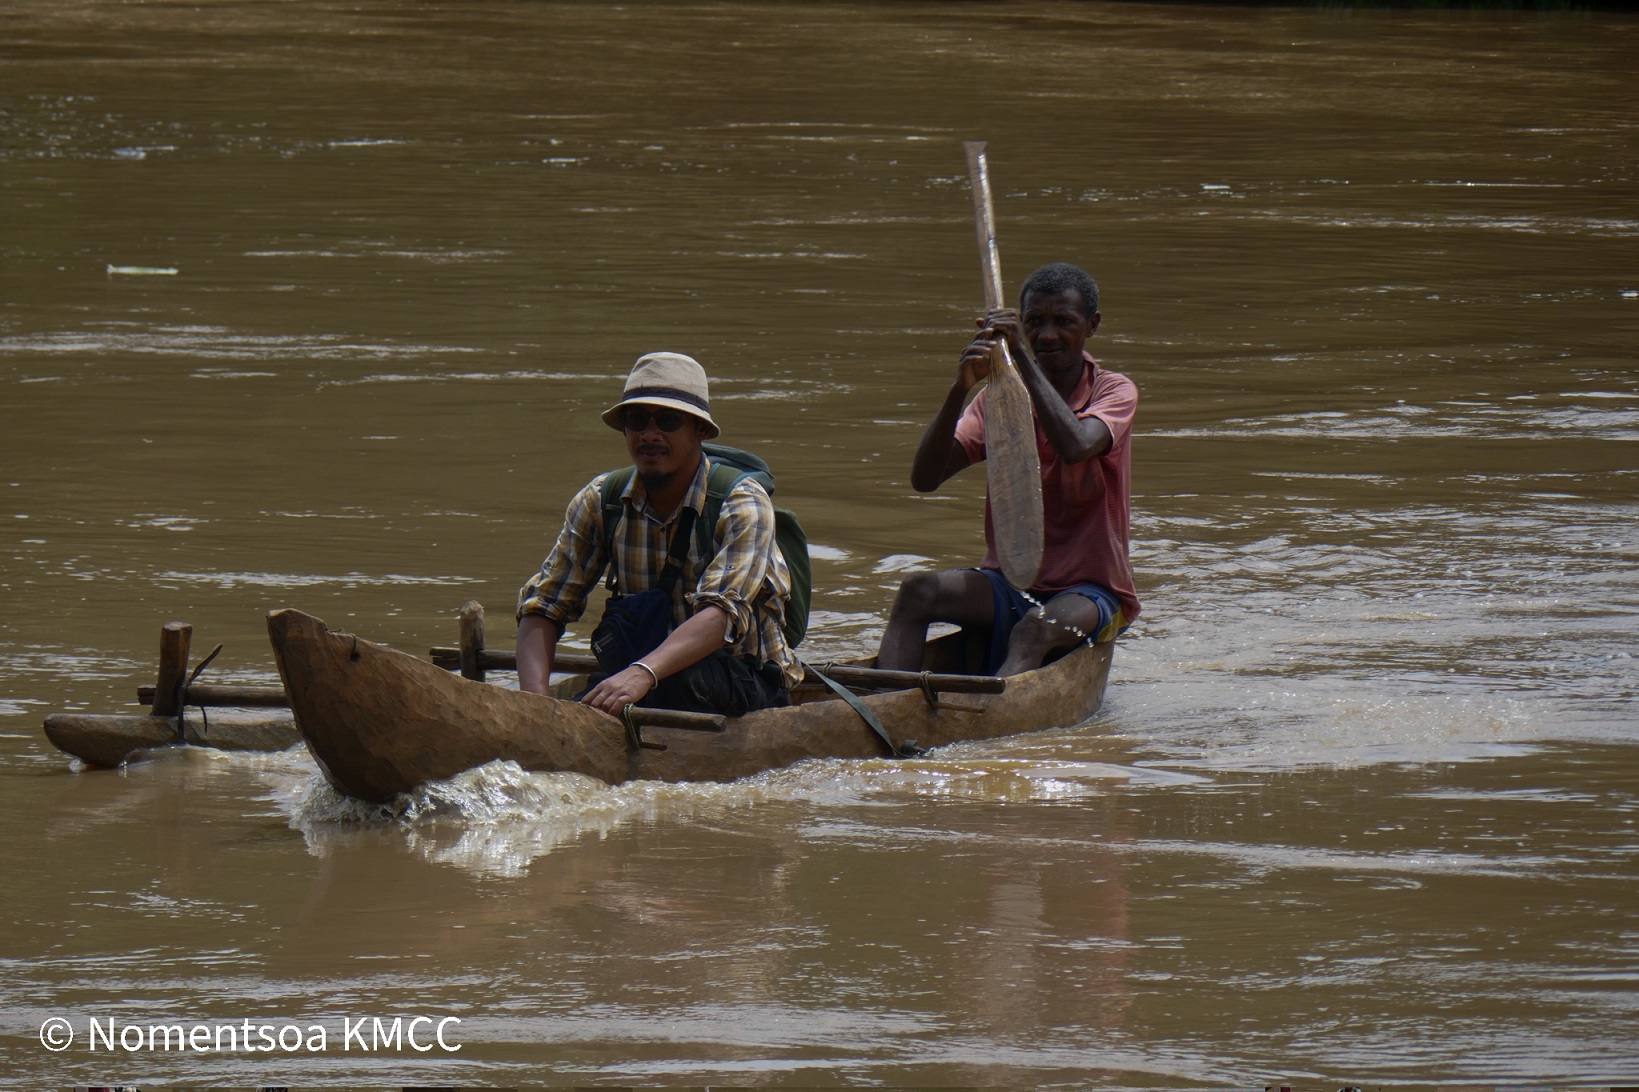 Two men in a dug-out canoe crossing a wide river